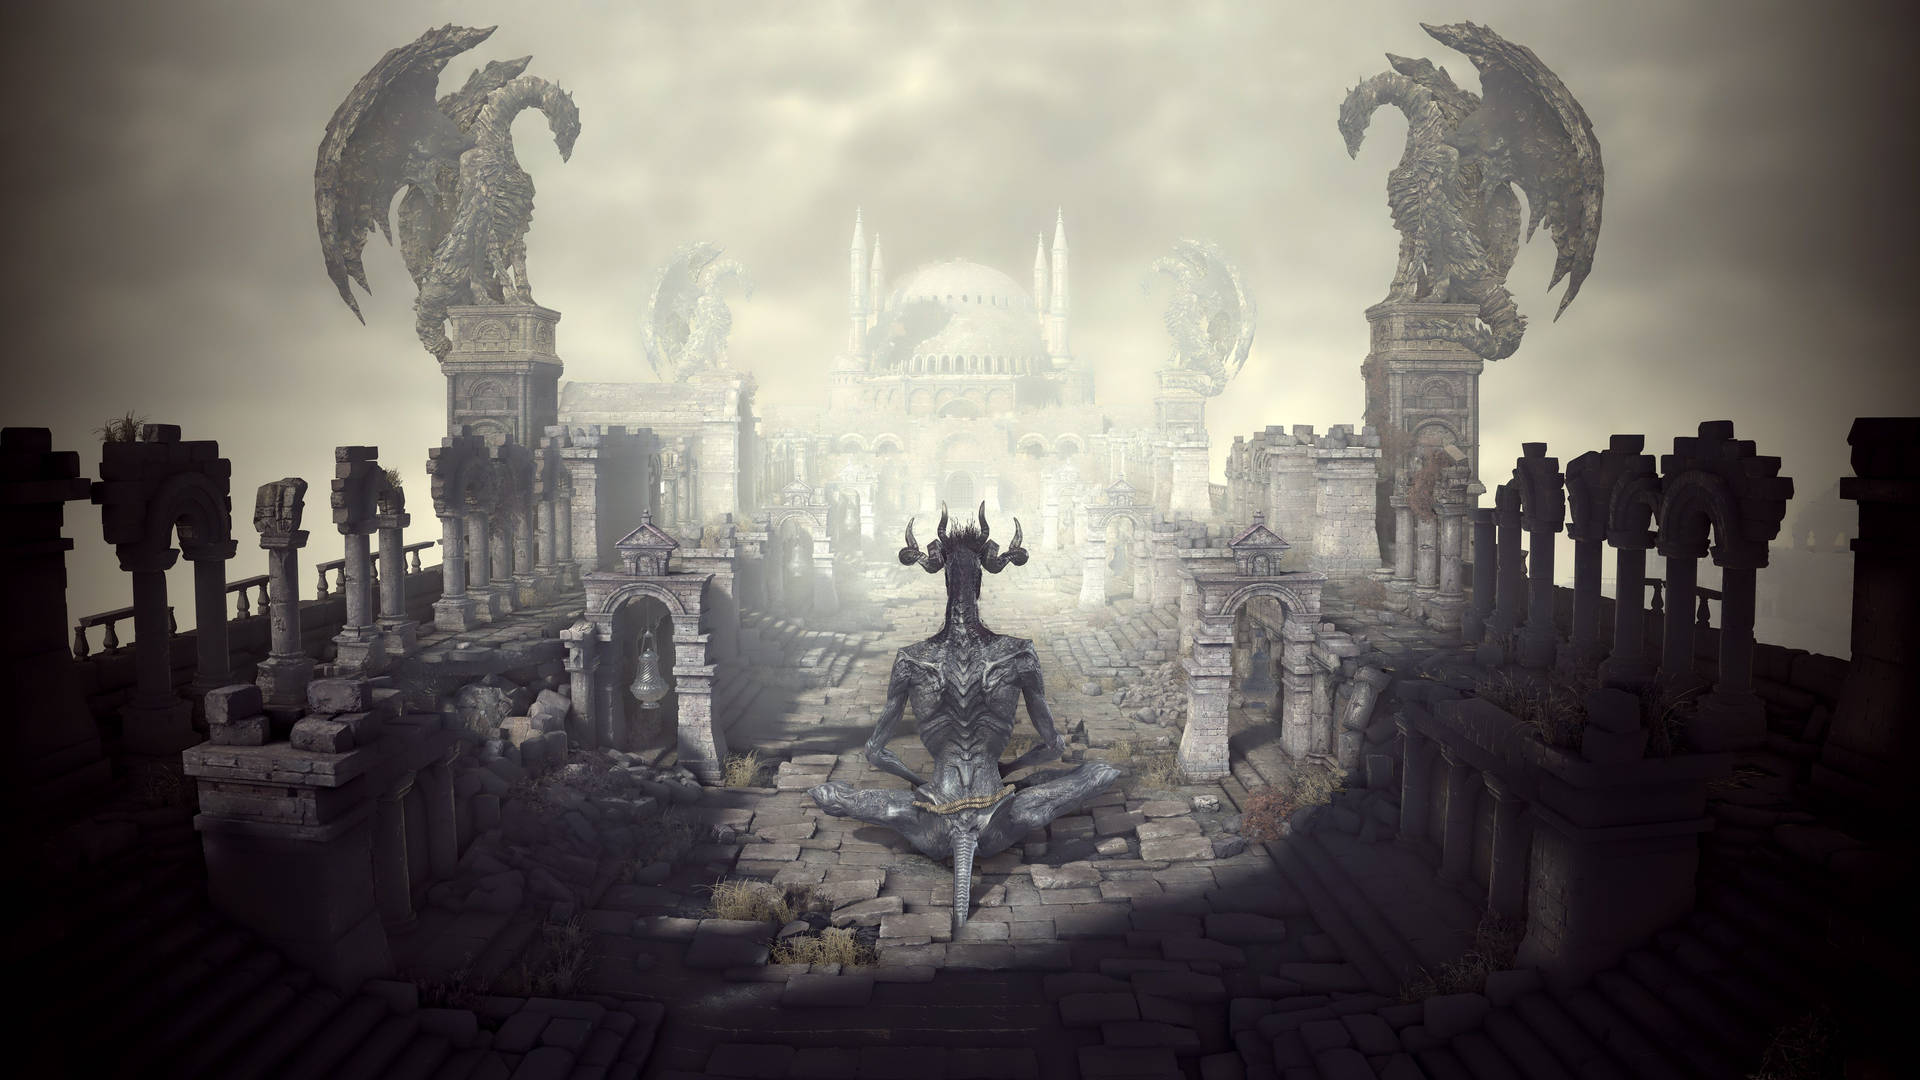 Experience the challenges and fury of Dark Souls 3 as you battle the Demon Prince. Wallpaper